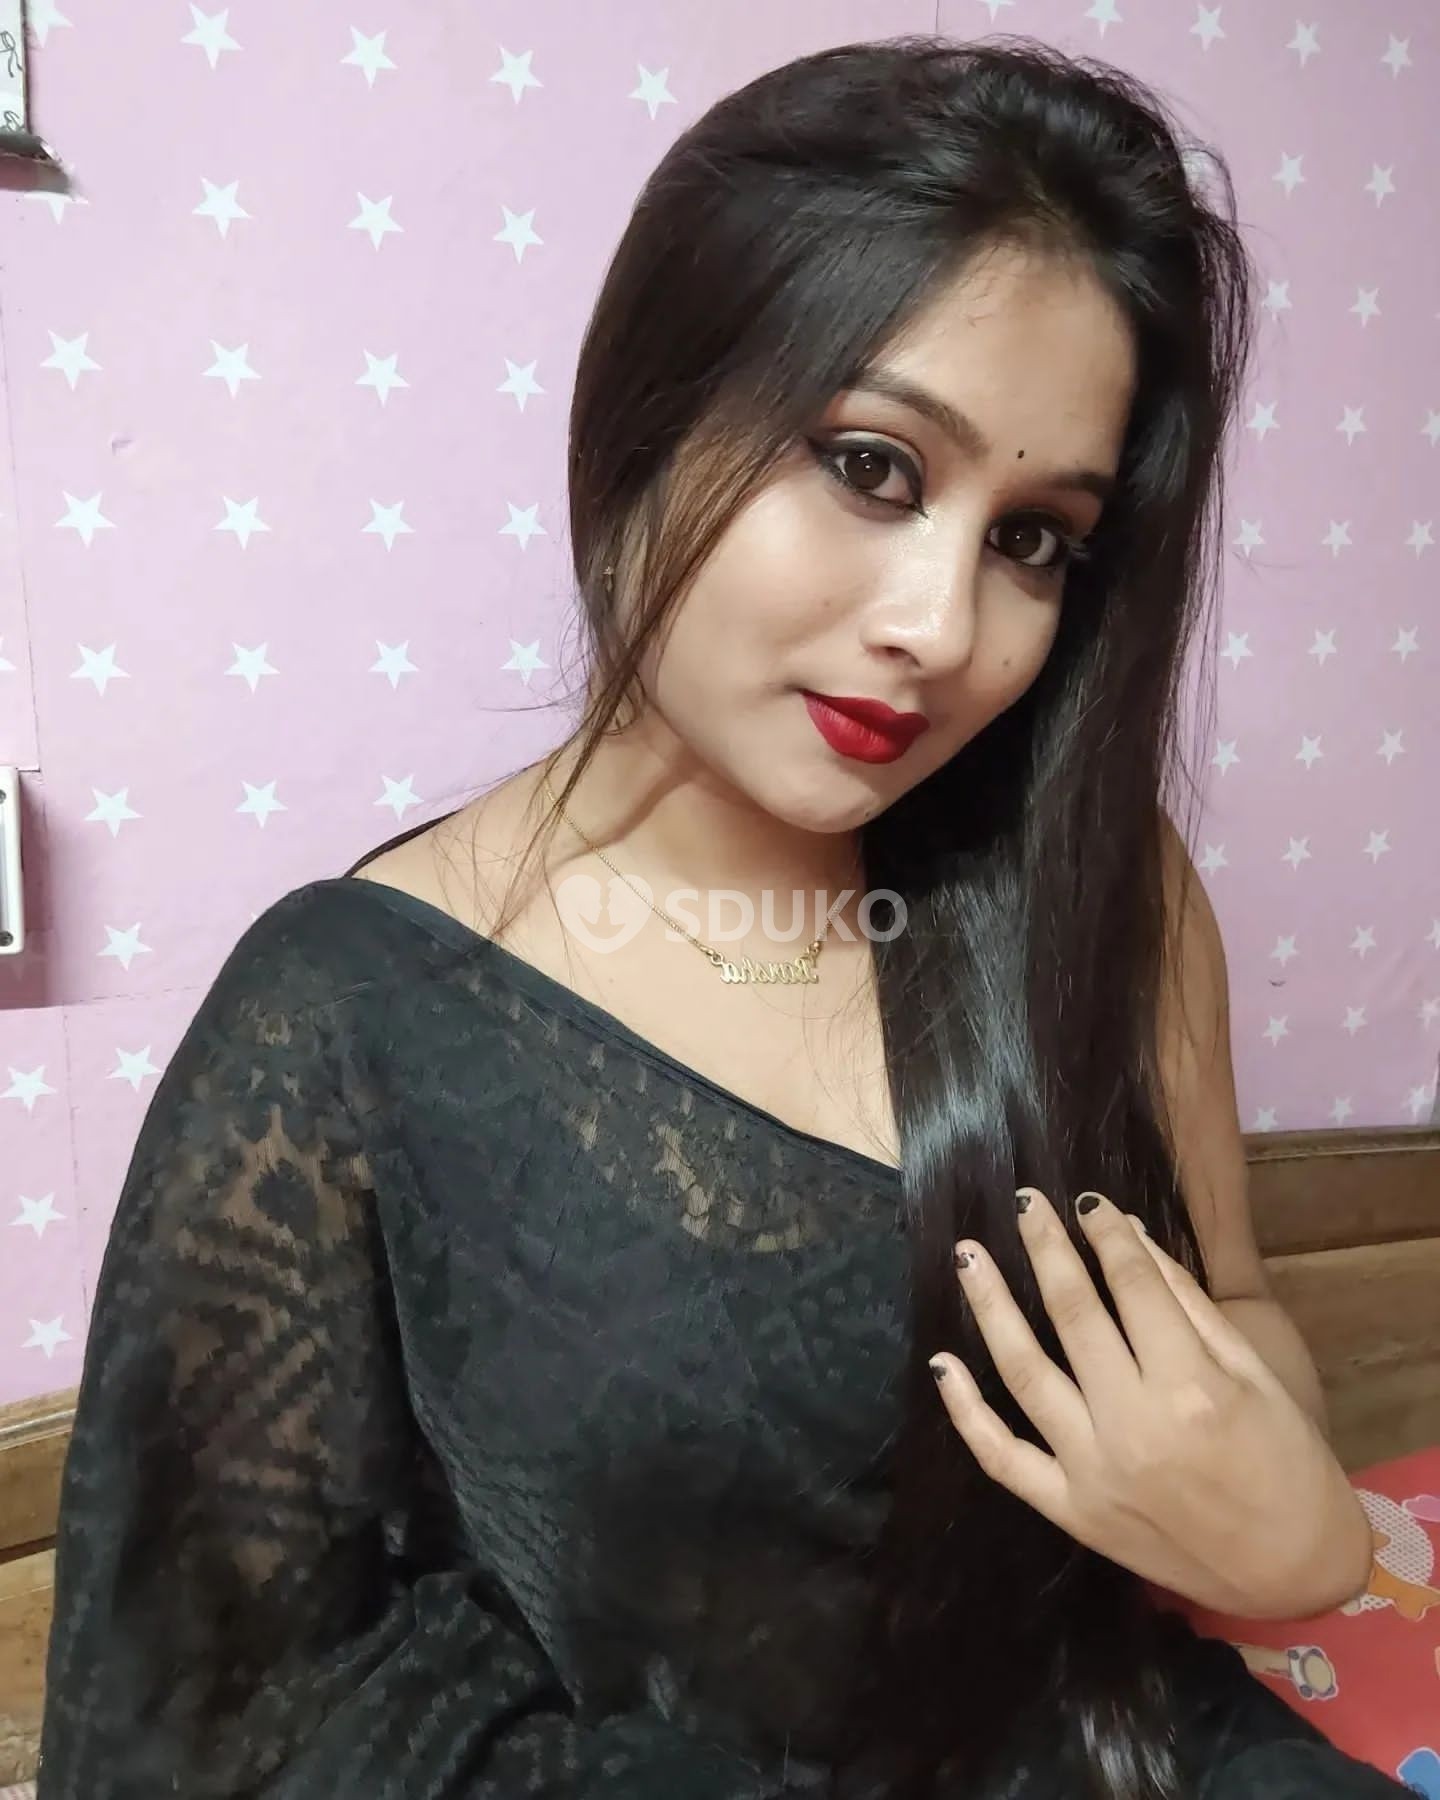 JABALPUR BEST GENUINE 🌟 COLLEGE GIRLS HOUSEWIFE ANYTIME CALL ME 24/7 AVAILABLE